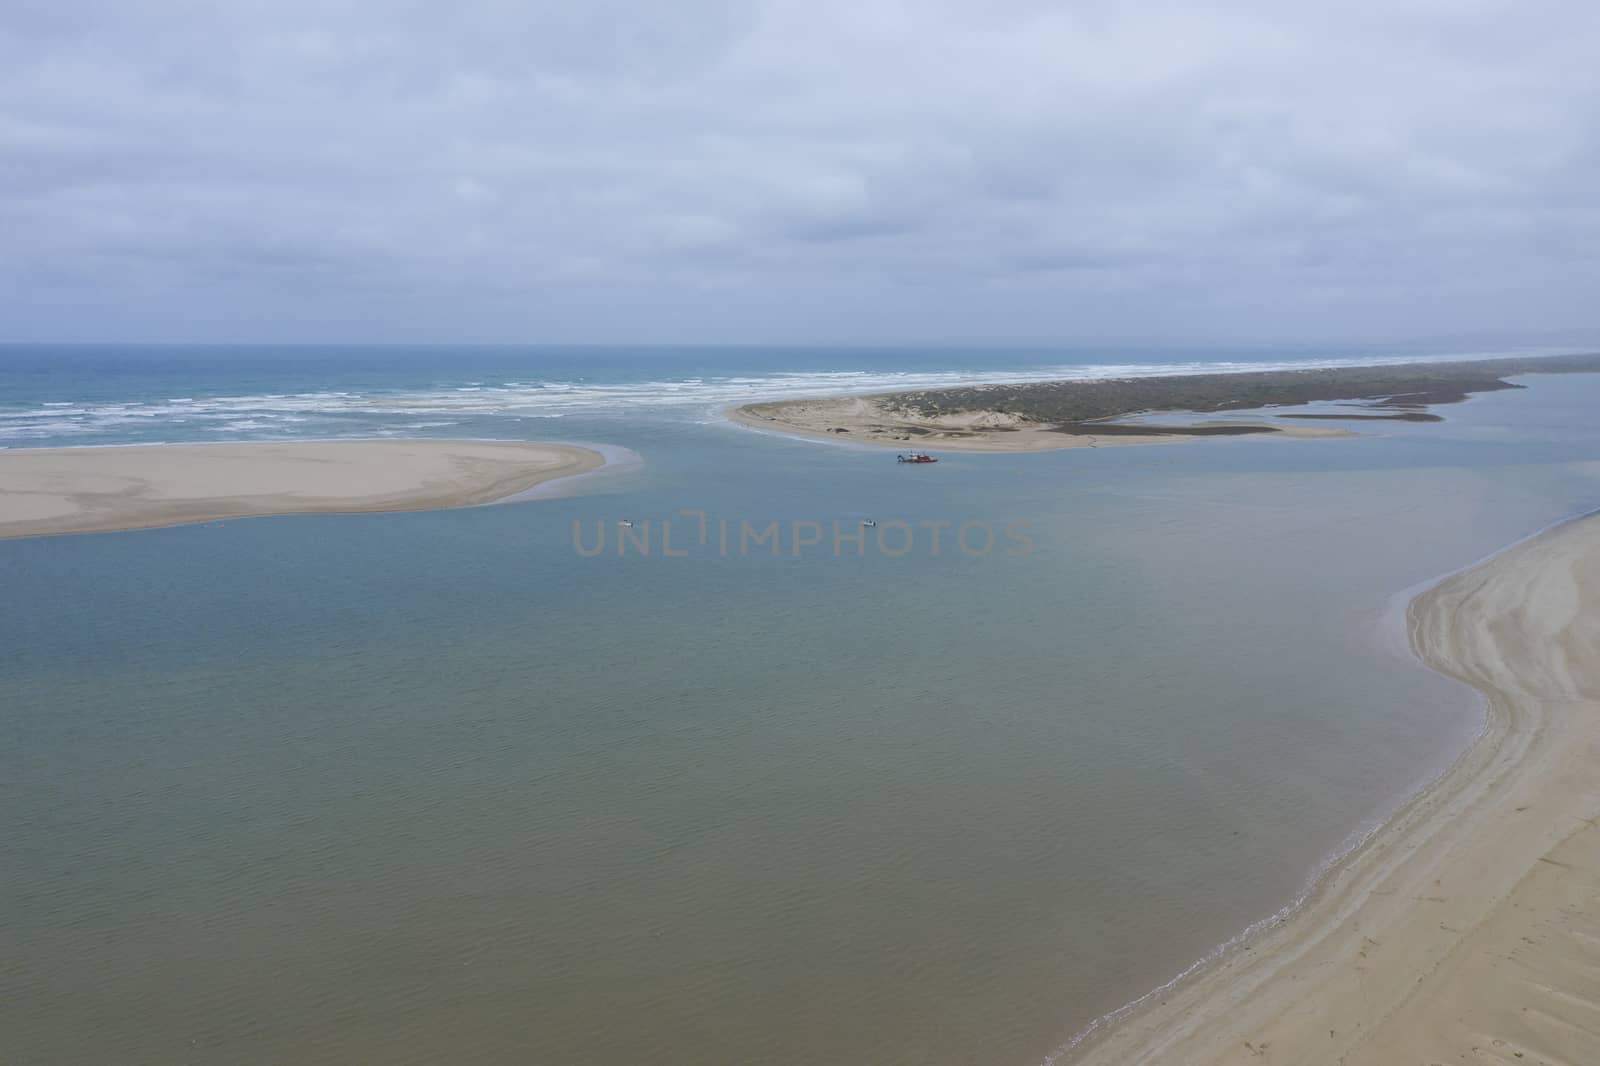 Aerial view of a sand dredger at the mouth of the River Murray in regional Australia by WittkePhotos